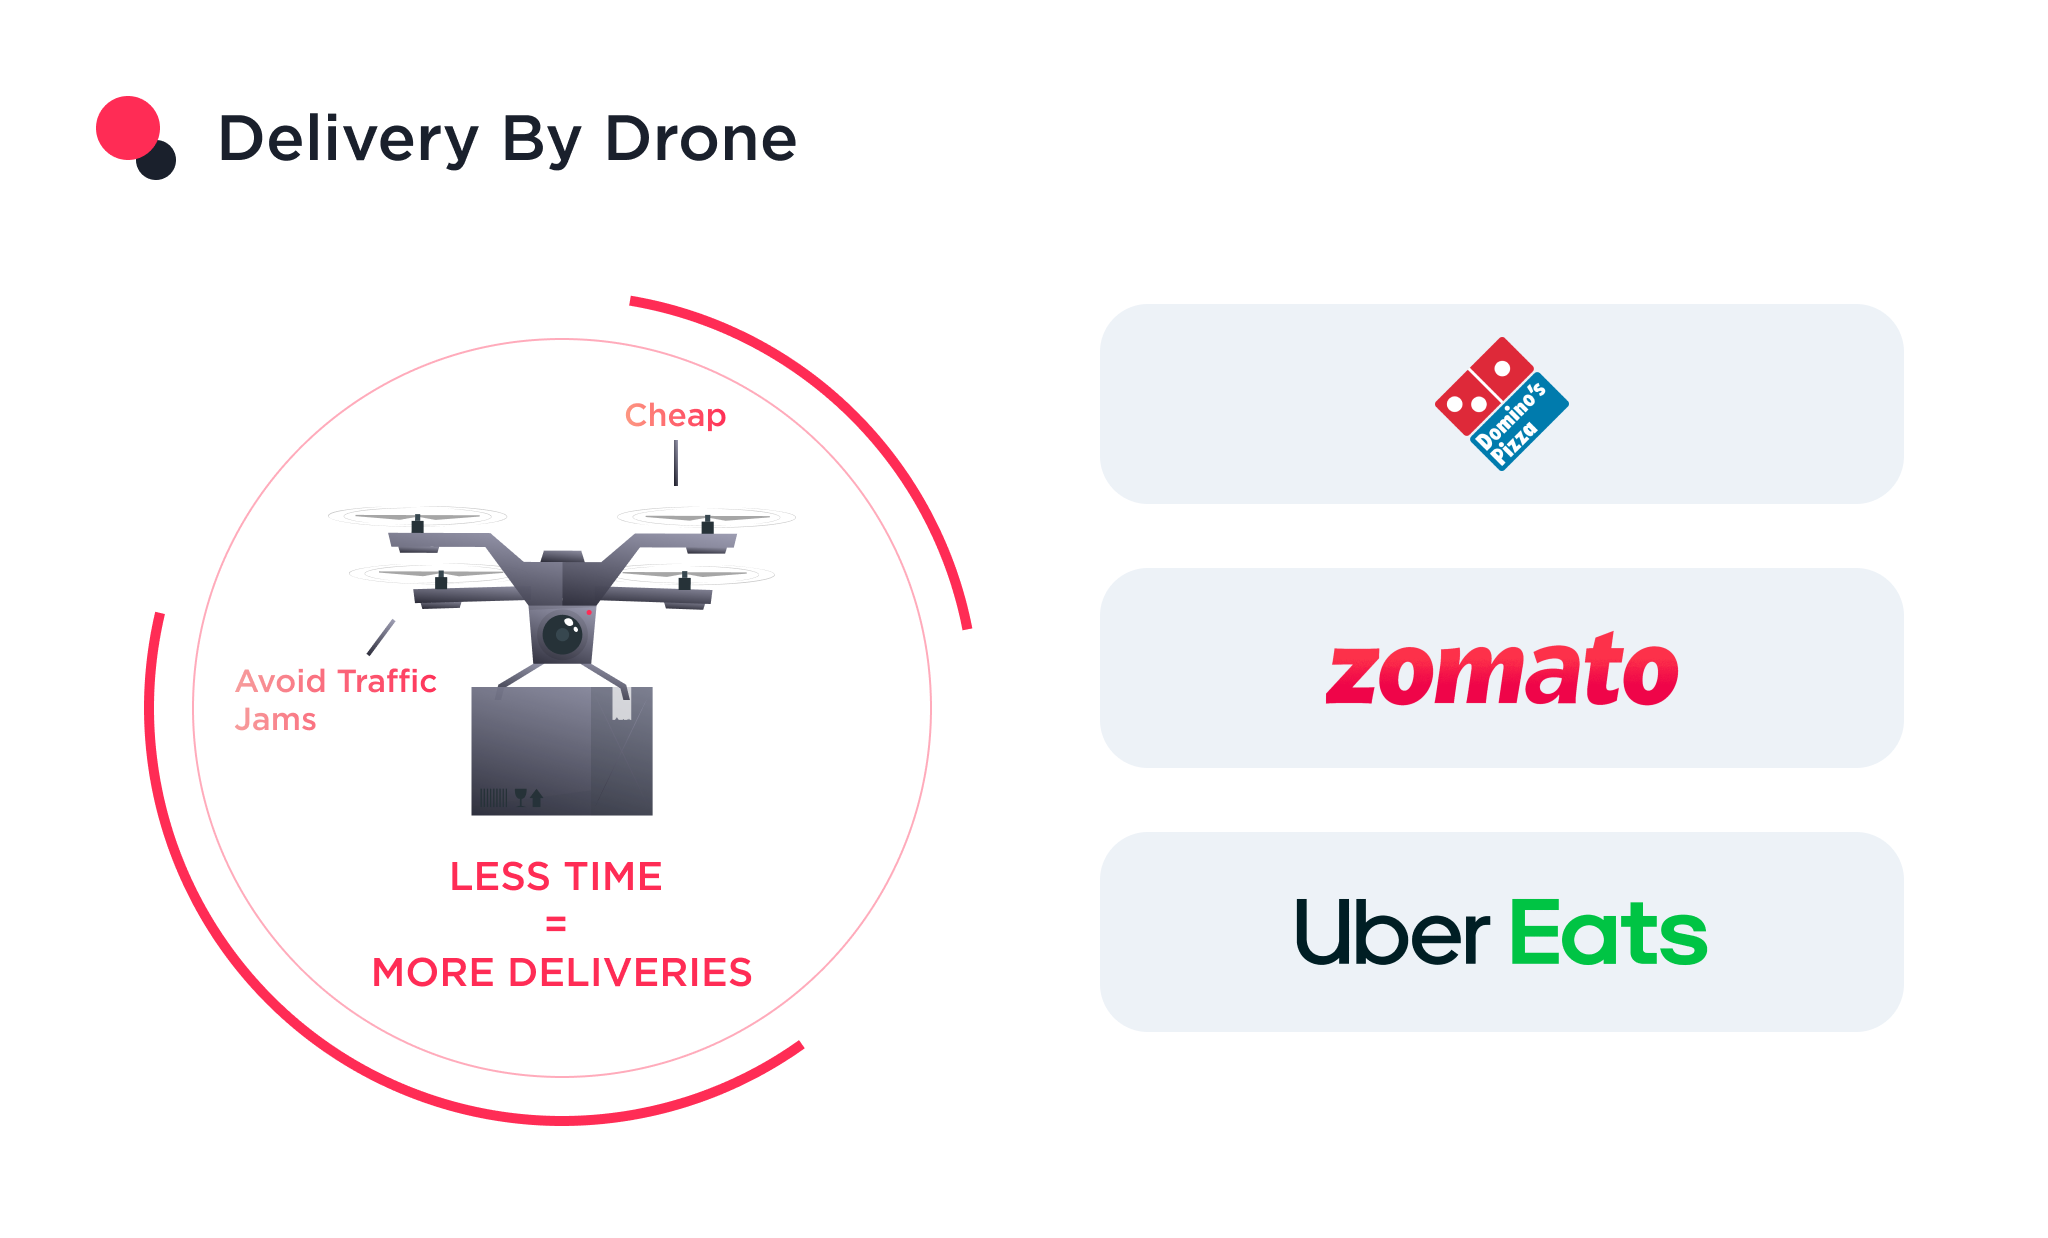 the image shows the delivery of food by drone 